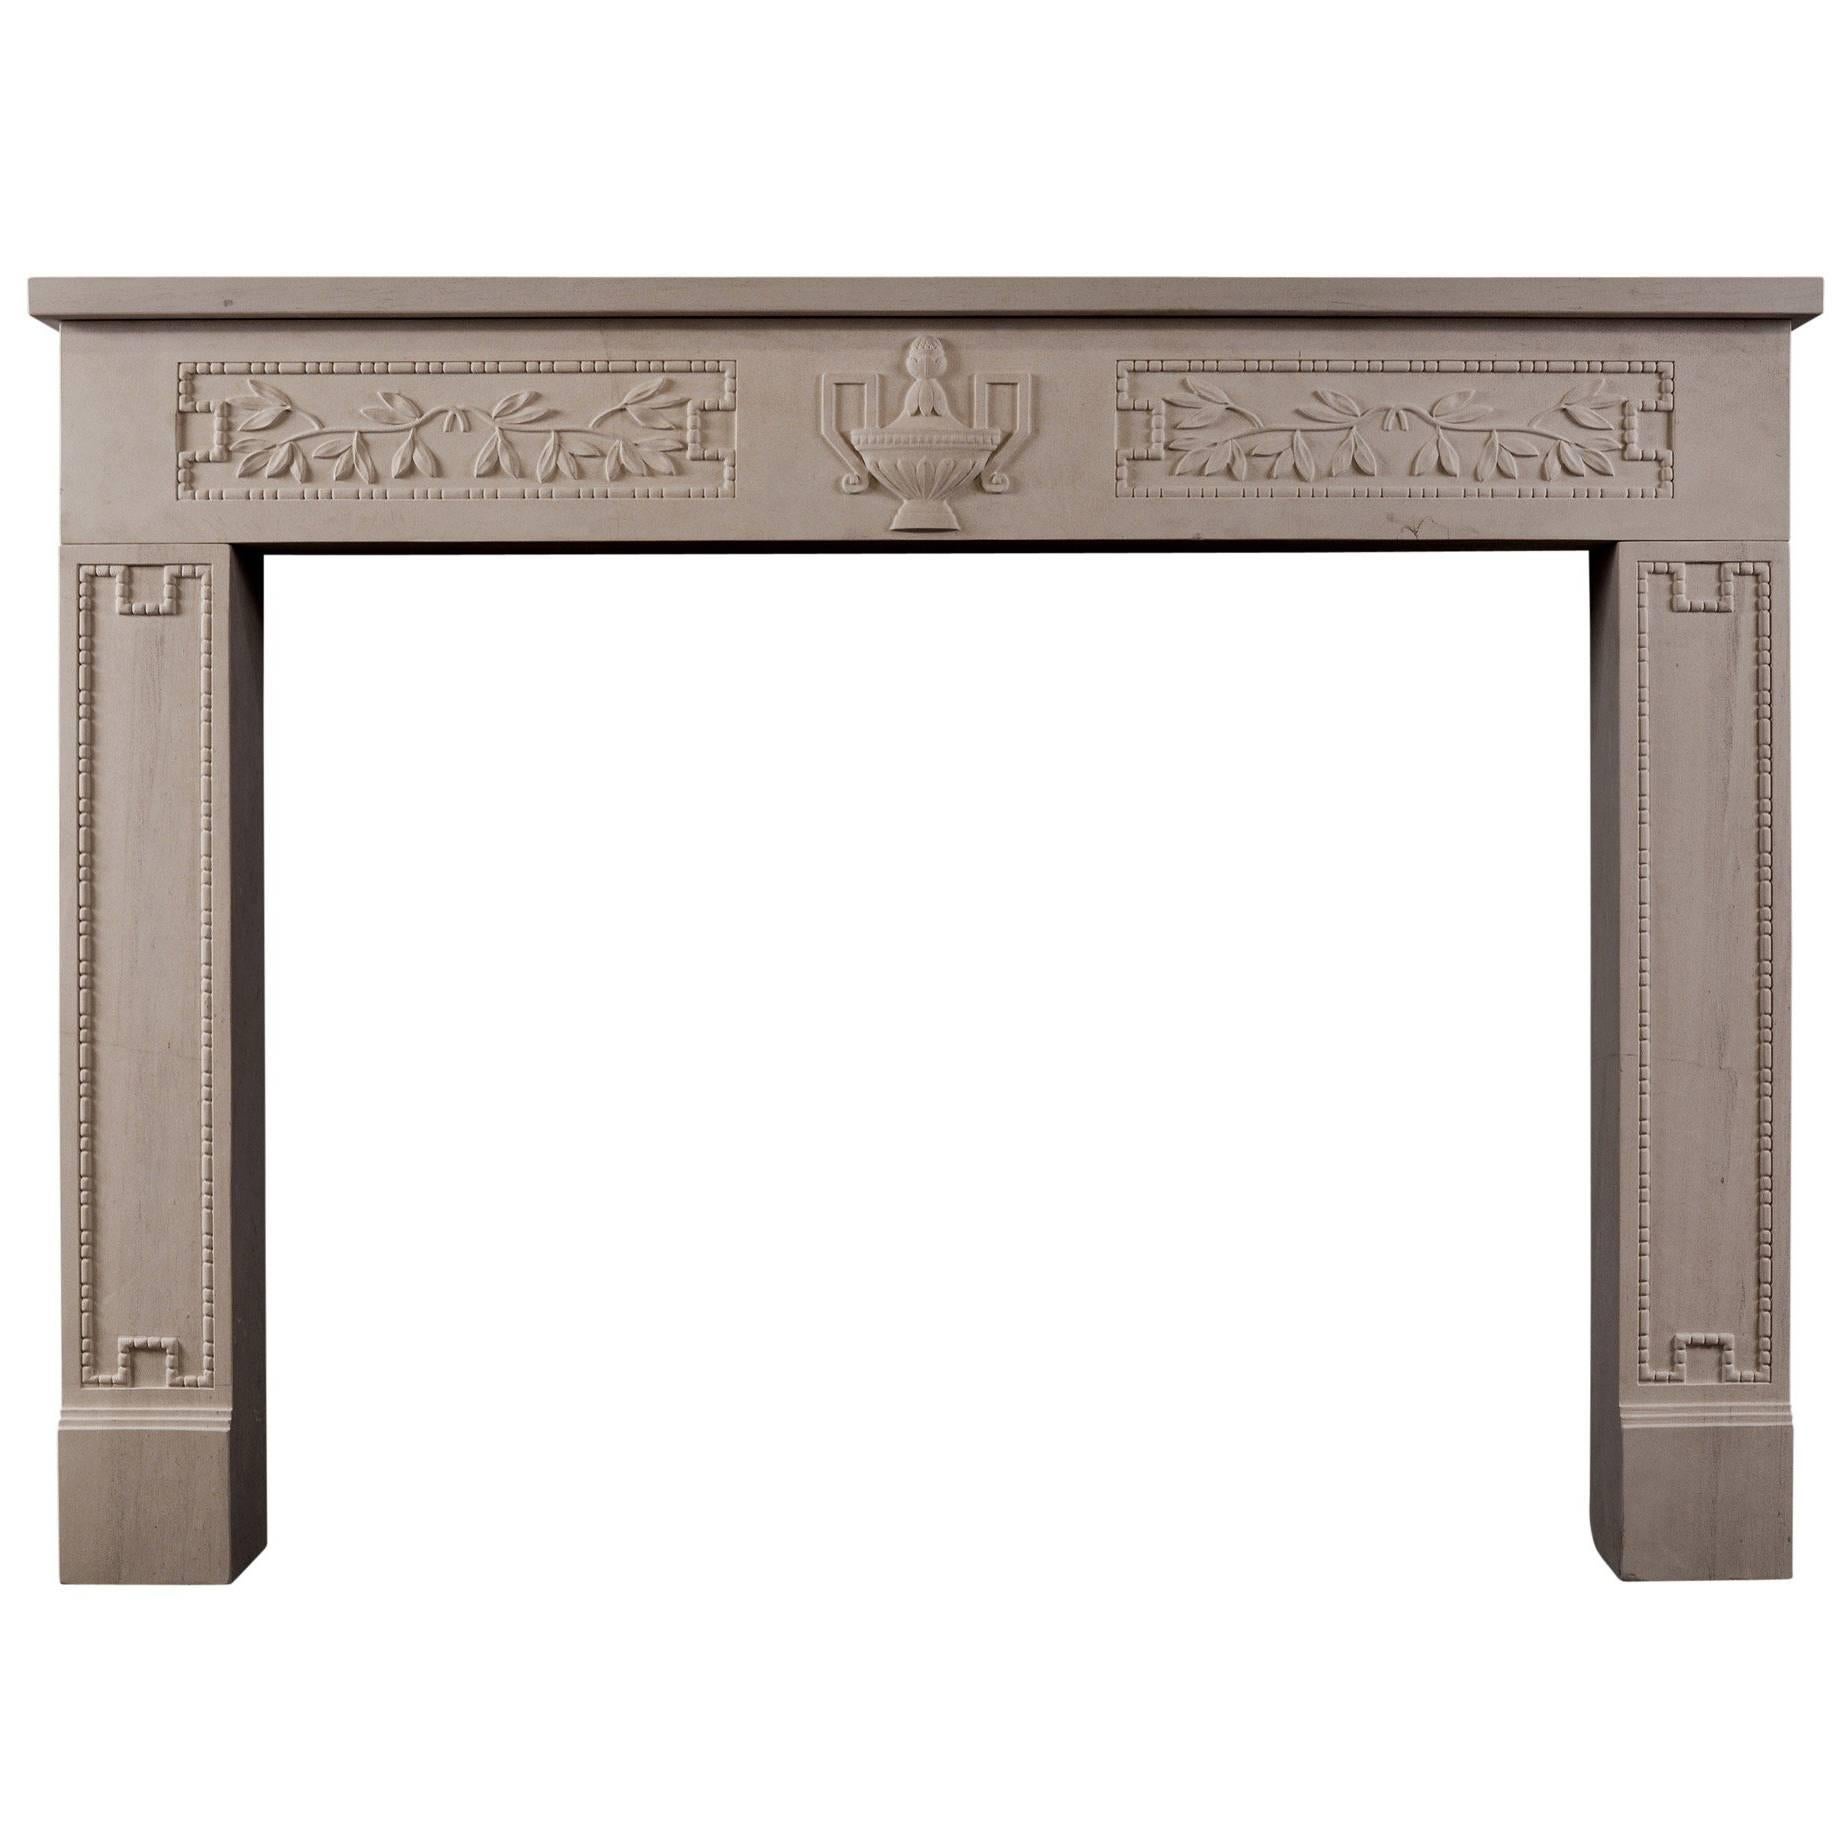 Rustic French Limestone Fireplace in the Louis XVI Style